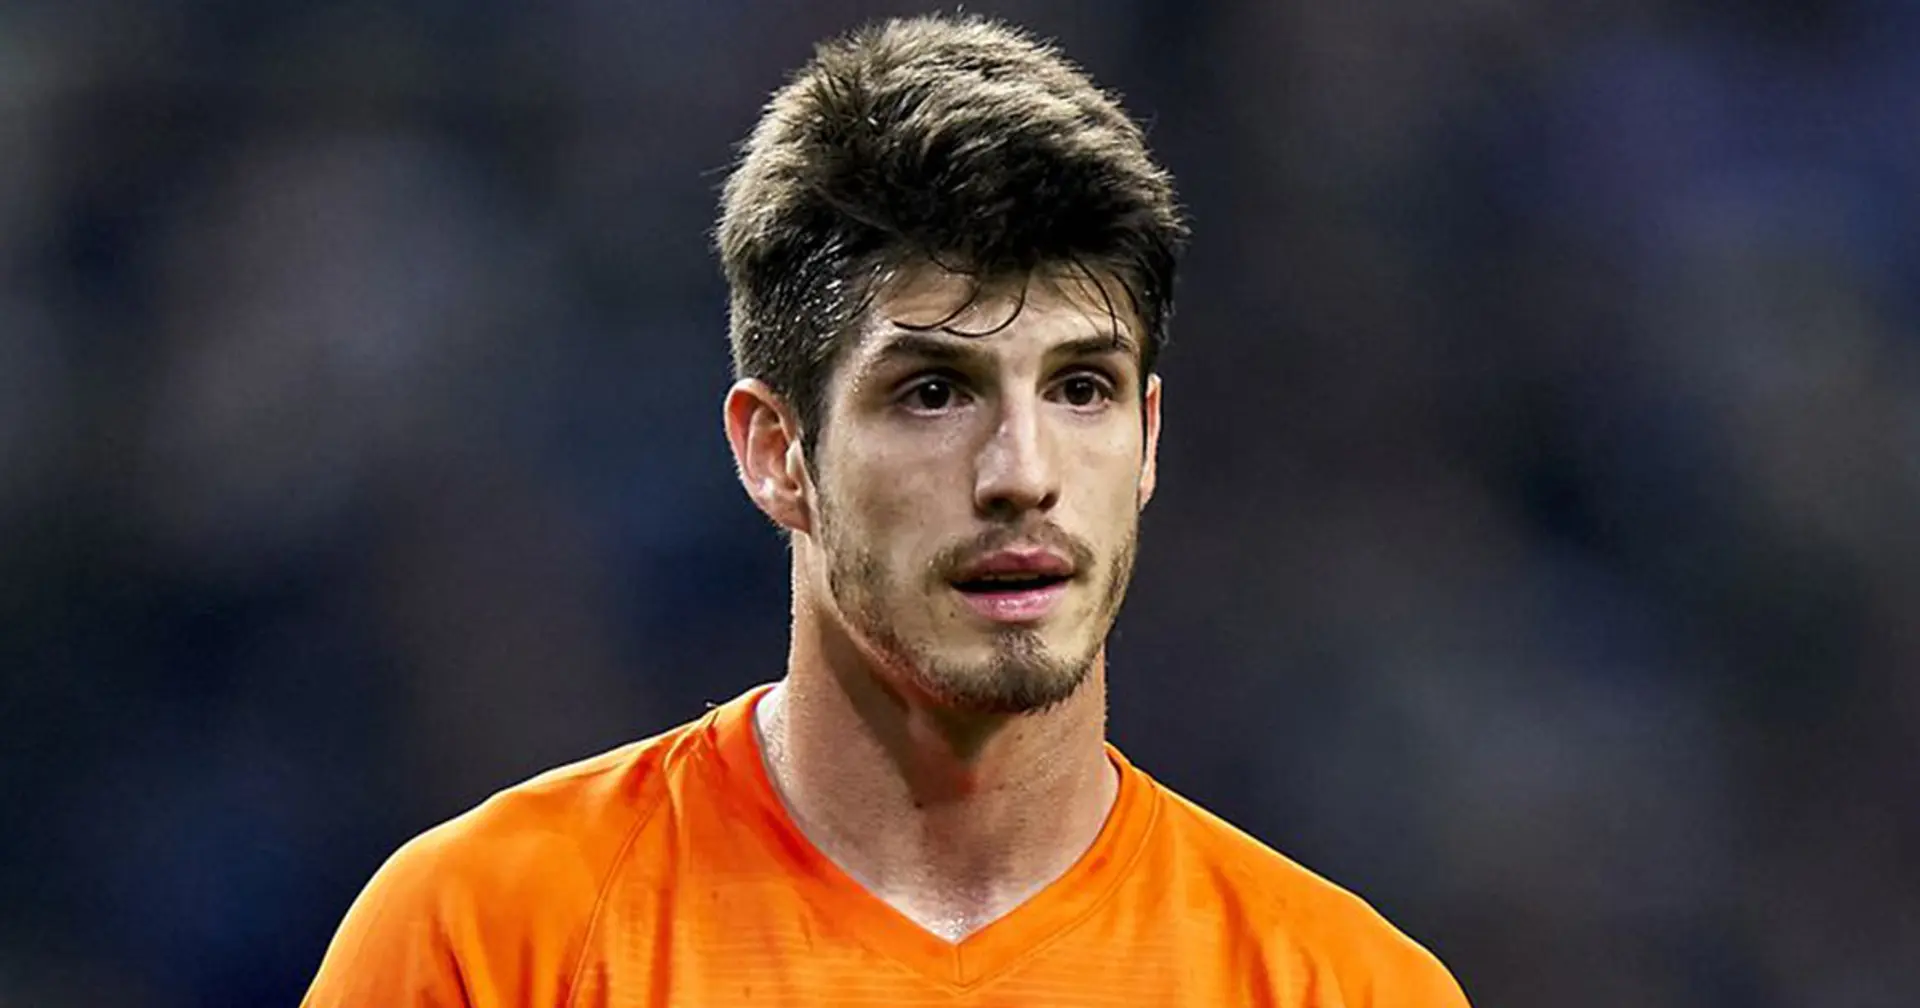 'I became just another business for them': Lucas Piazon denounces Chelsea's loan policy after making 3 Blues apperances in 8 years